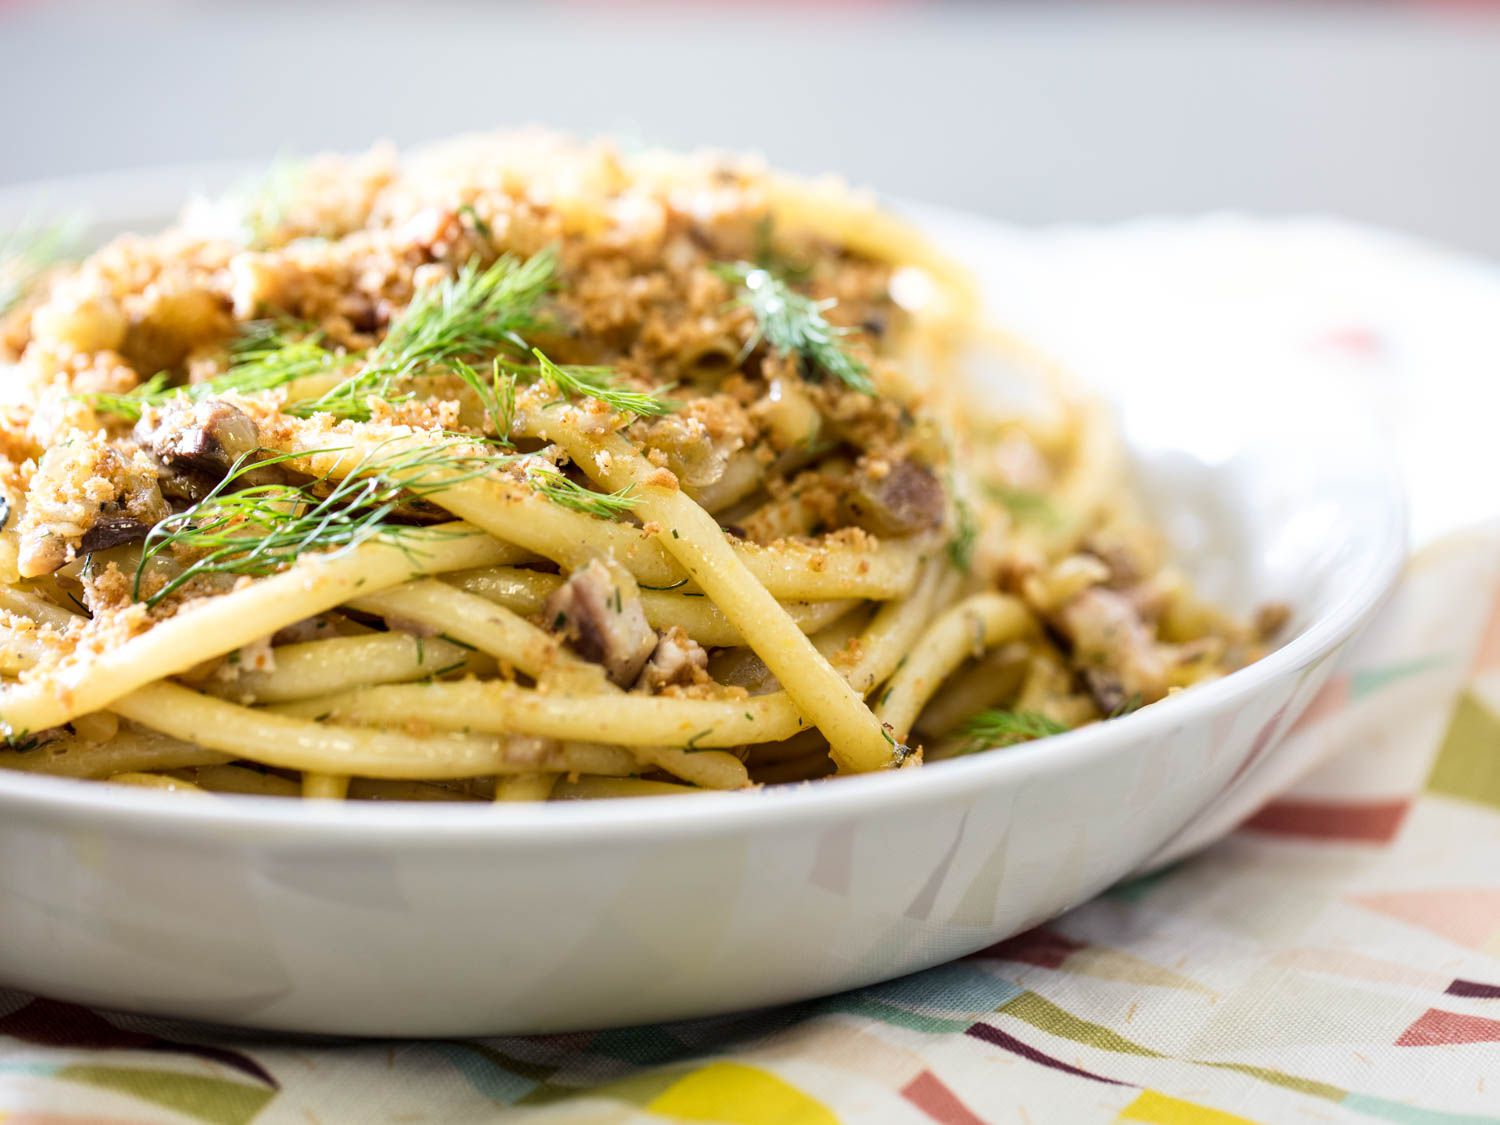 A shallow white bowl filled with a mound of pasta con sarde topped with bread crumbs